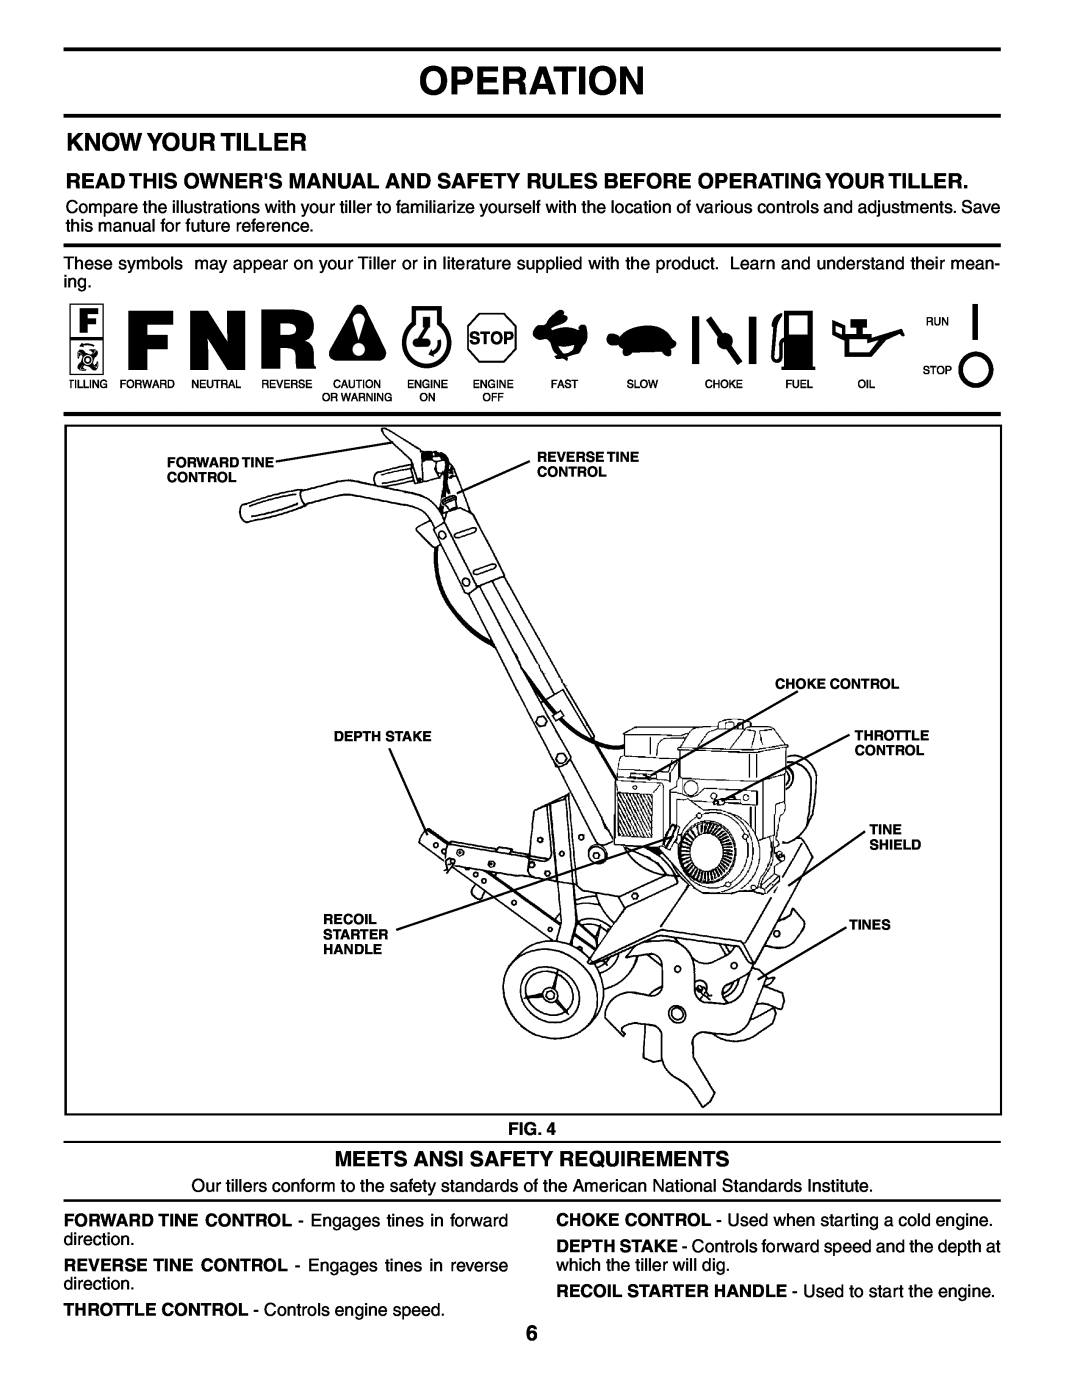 Poulan HDF550N owner manual Operation, Know Your Tiller, Meets Ansi Safety Requirements 